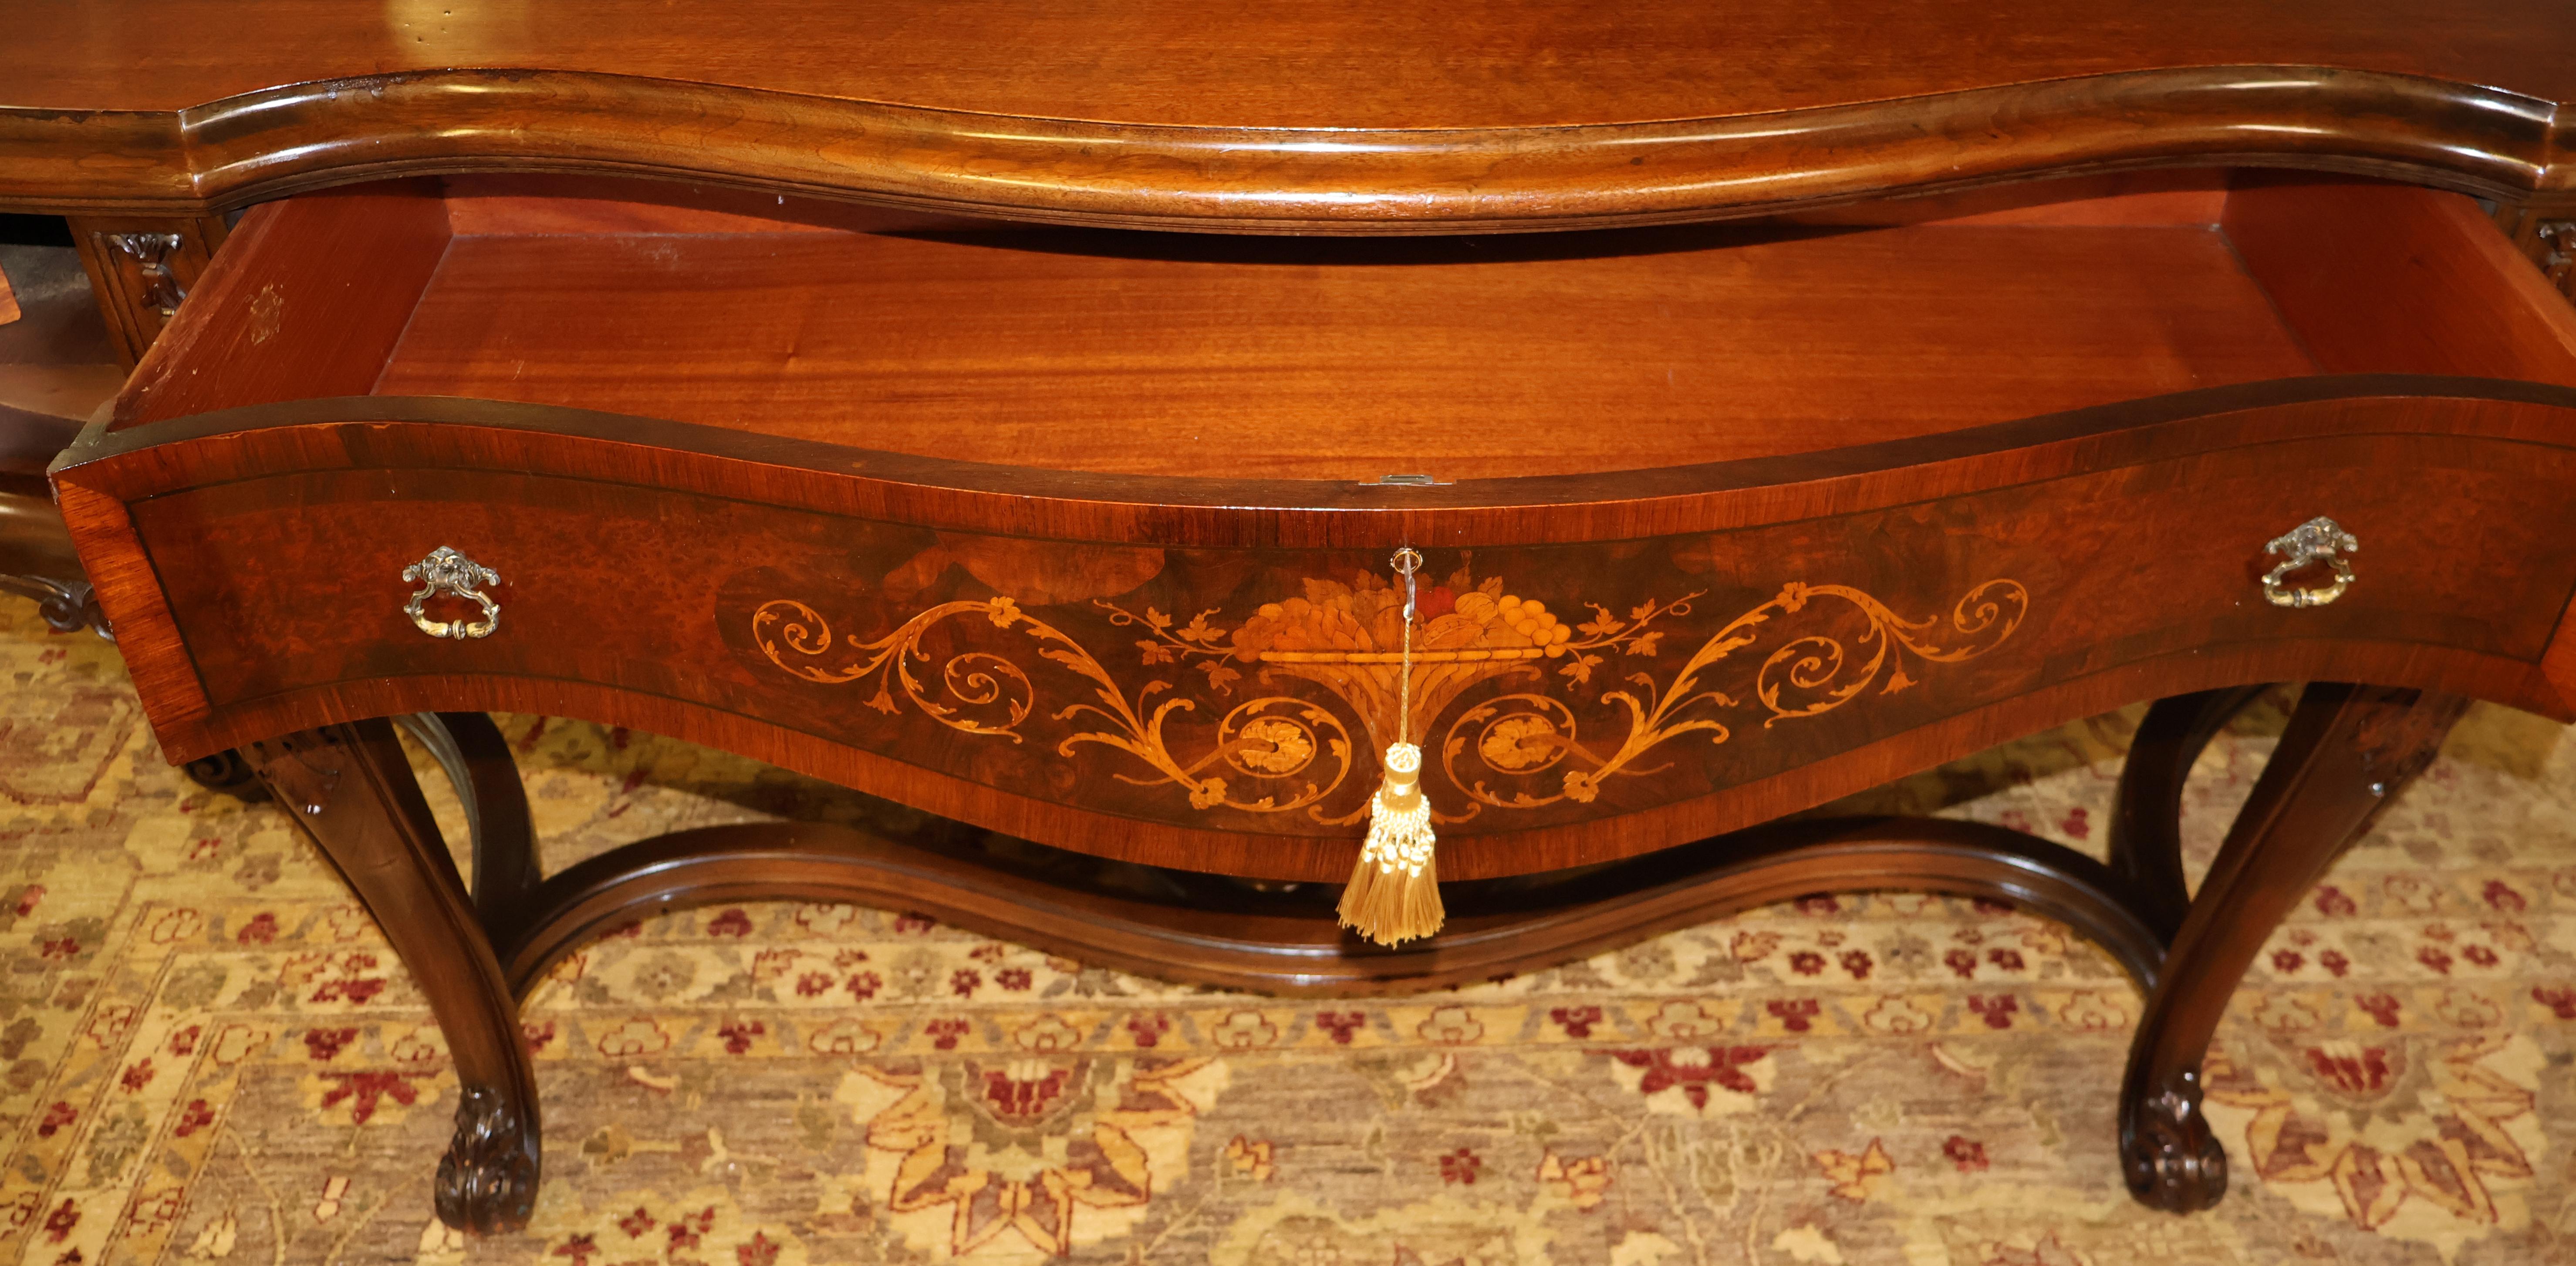 1920's Walnut Inlaid French Style Server Buffet Sideboard By Rockford Furniture For Sale 3